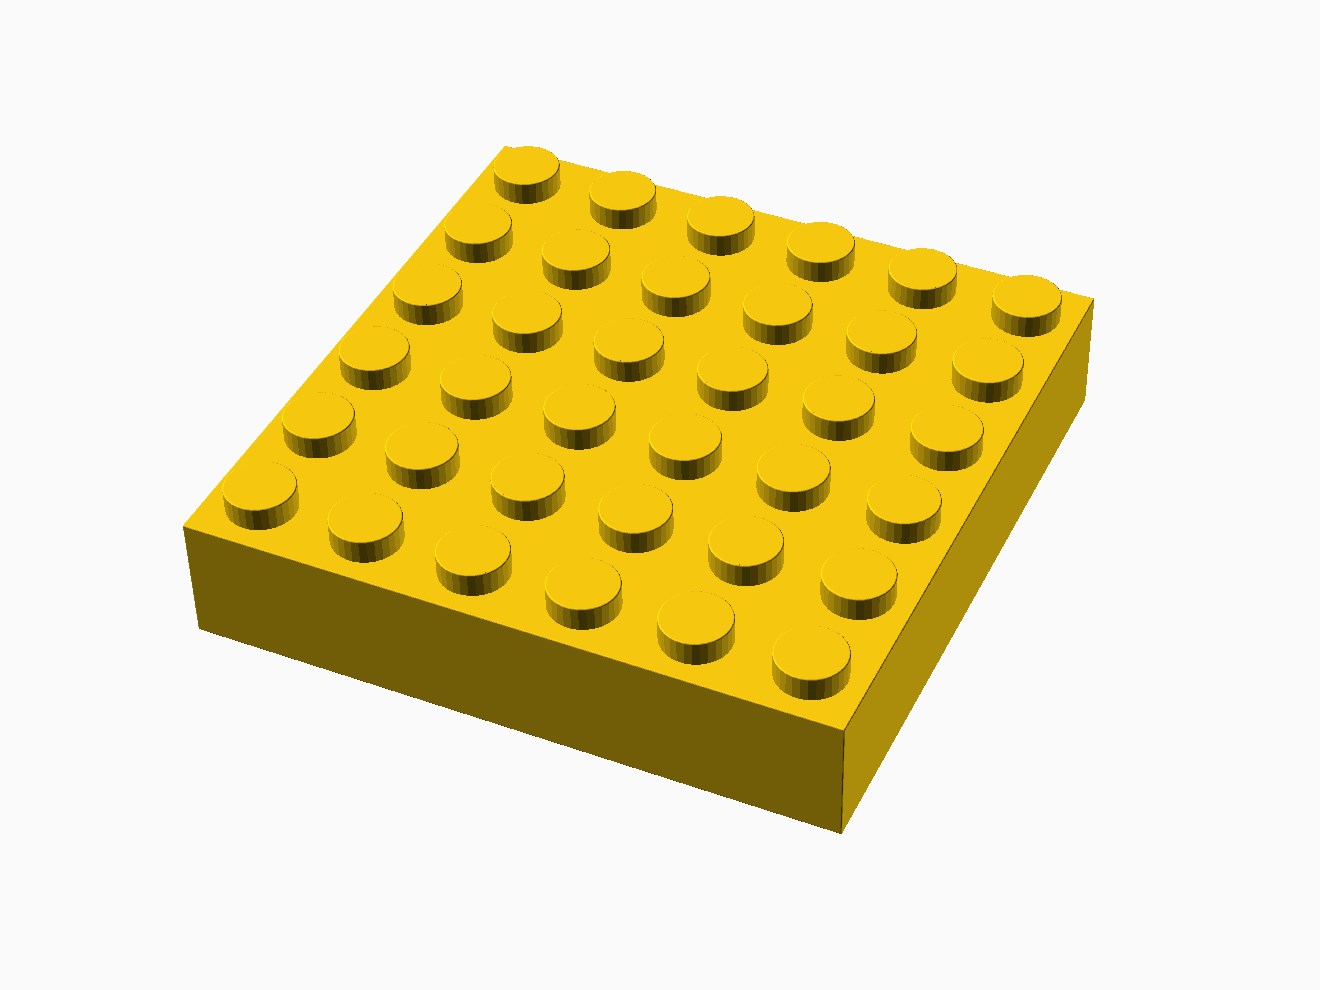 3D printable model of a LEGO 6x6 Brick with standard knobs.